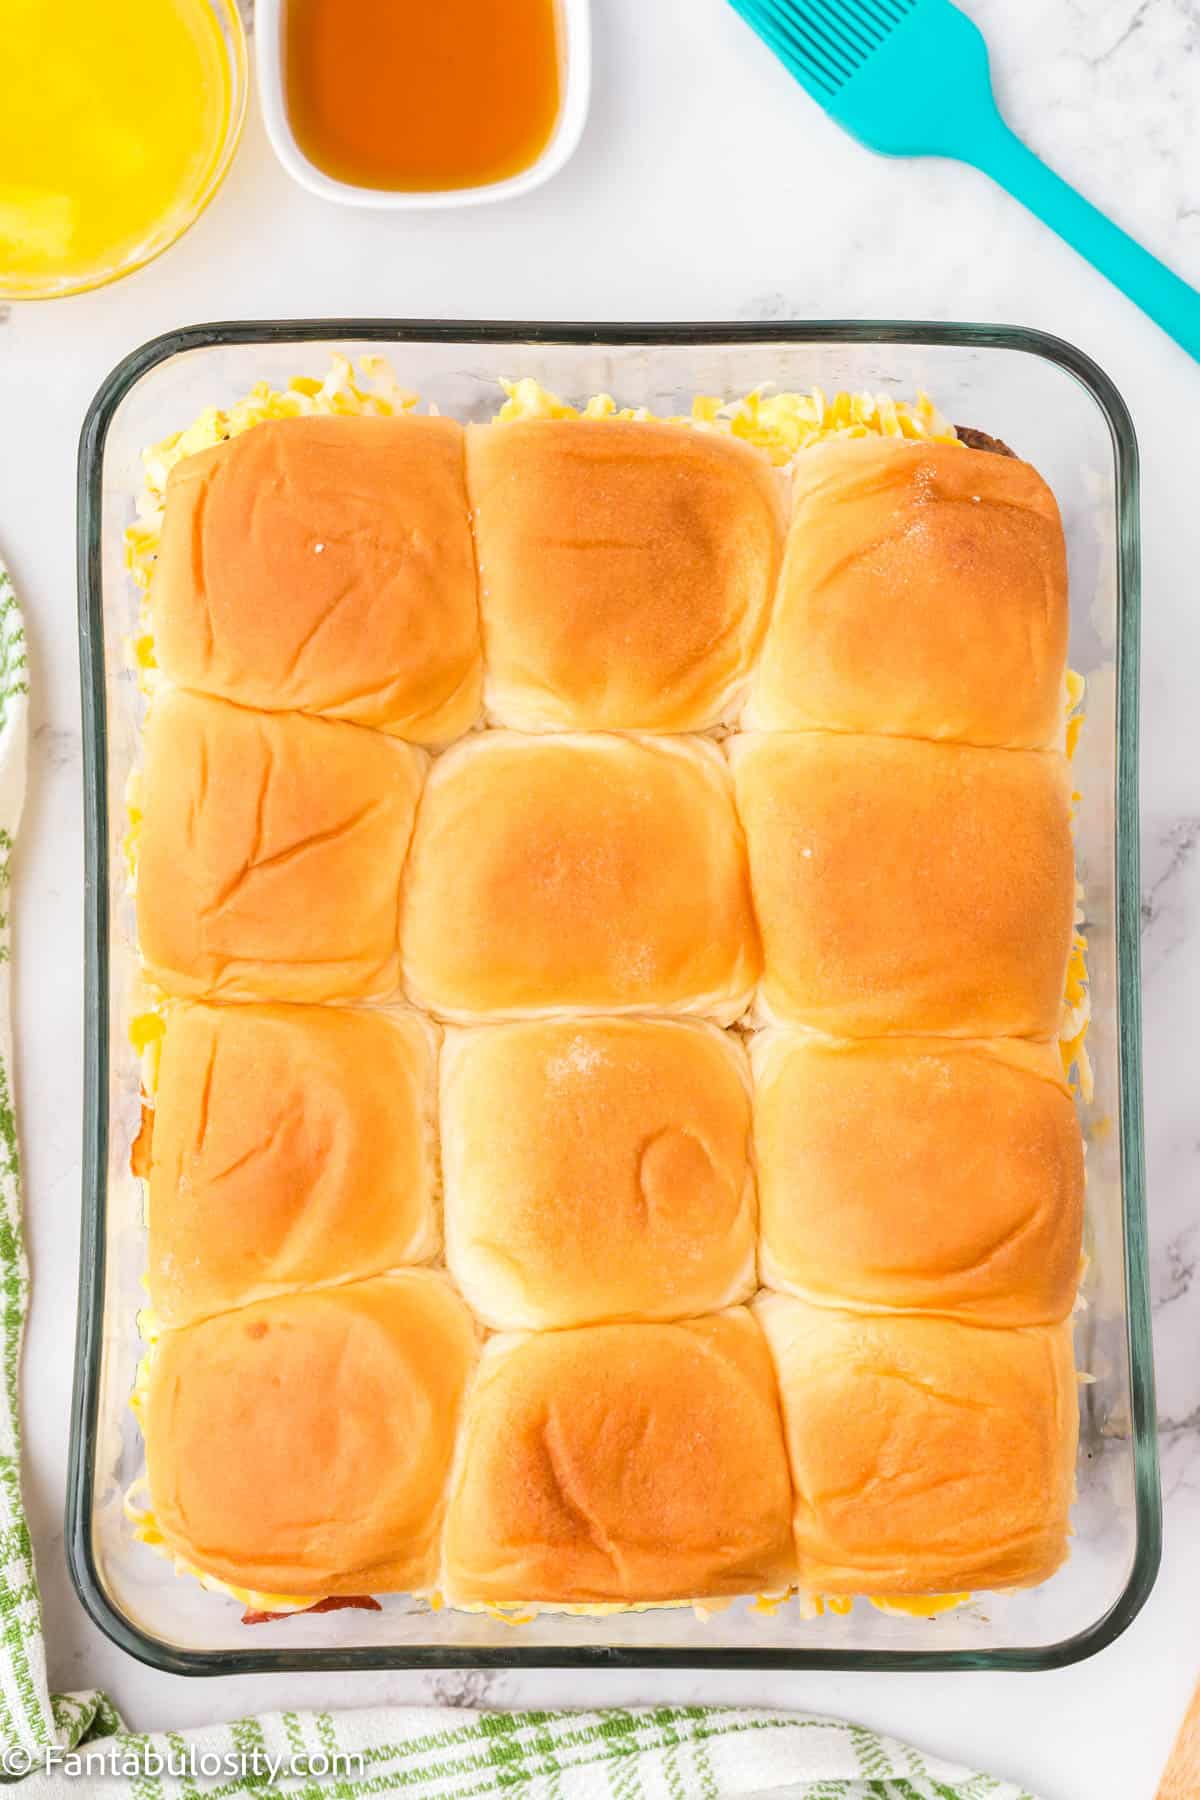 The top buns of 12 breakfast sliders have been placed on top of the eggs, sausage, bacon and cheese in a large glass baking dish